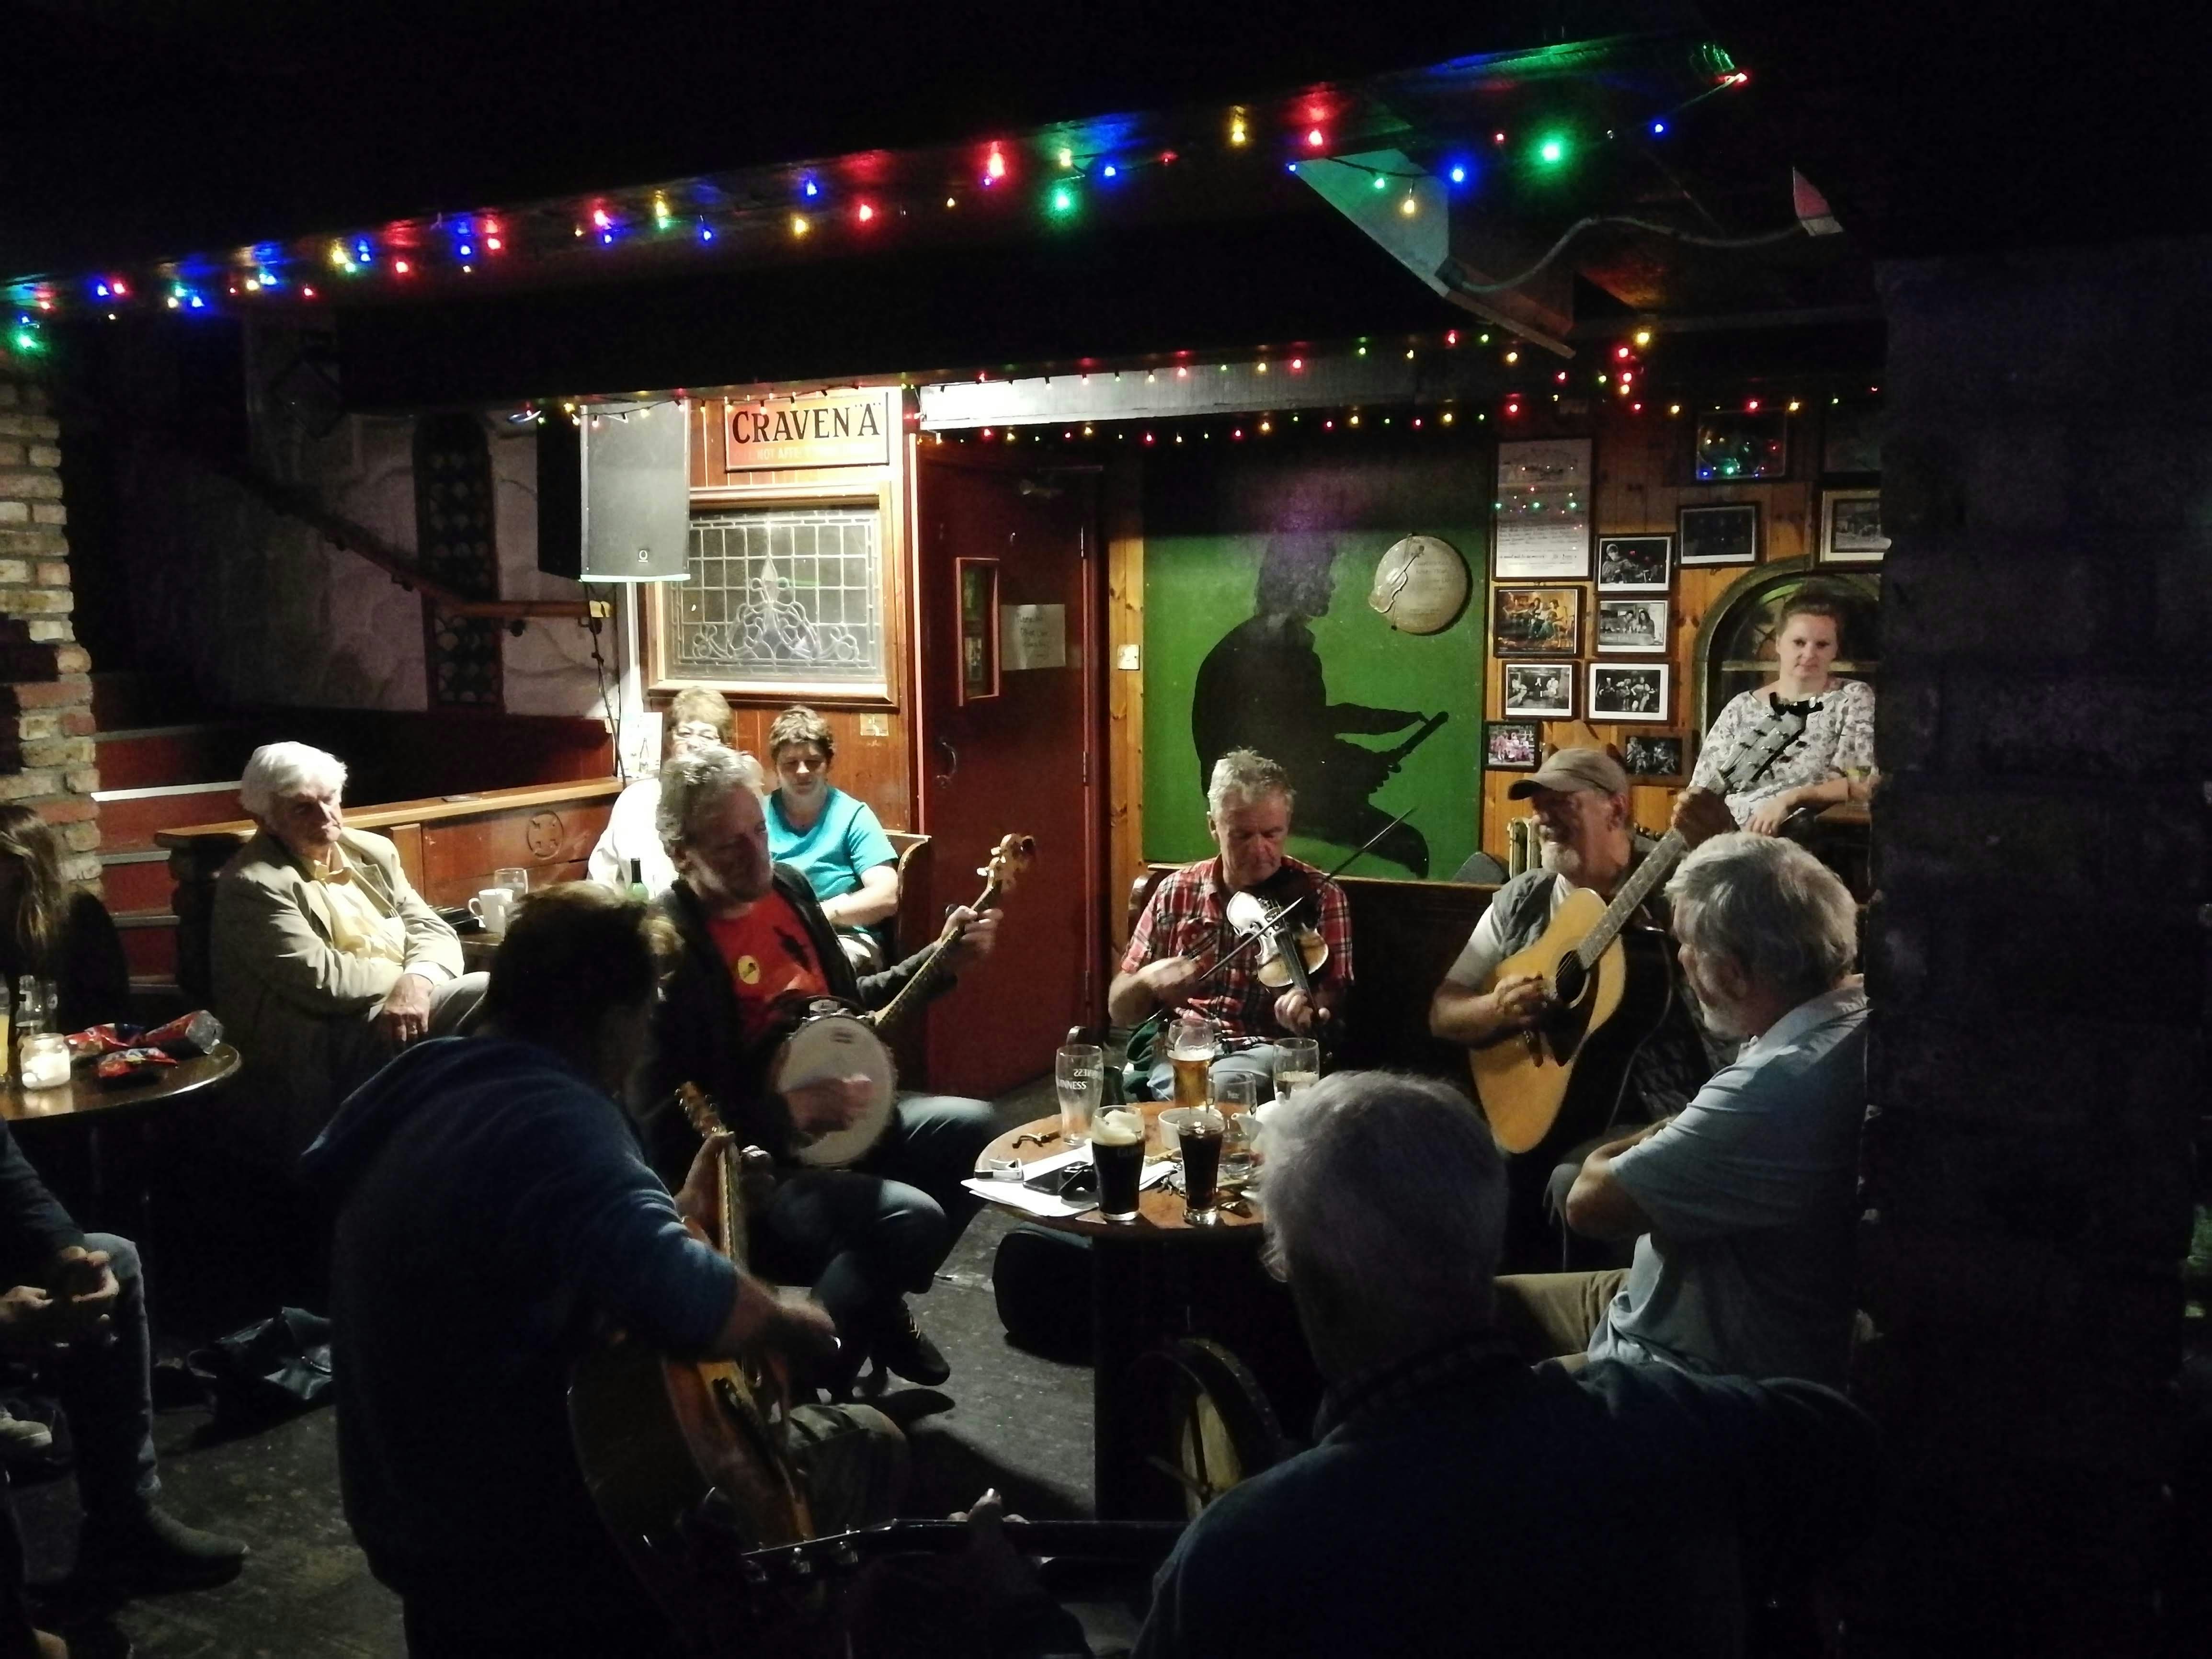 Inside a dimly lit pub, a group of folk musicians are playing around a table, as an audience looks on. Colourful fairy lights are hanging overhead.